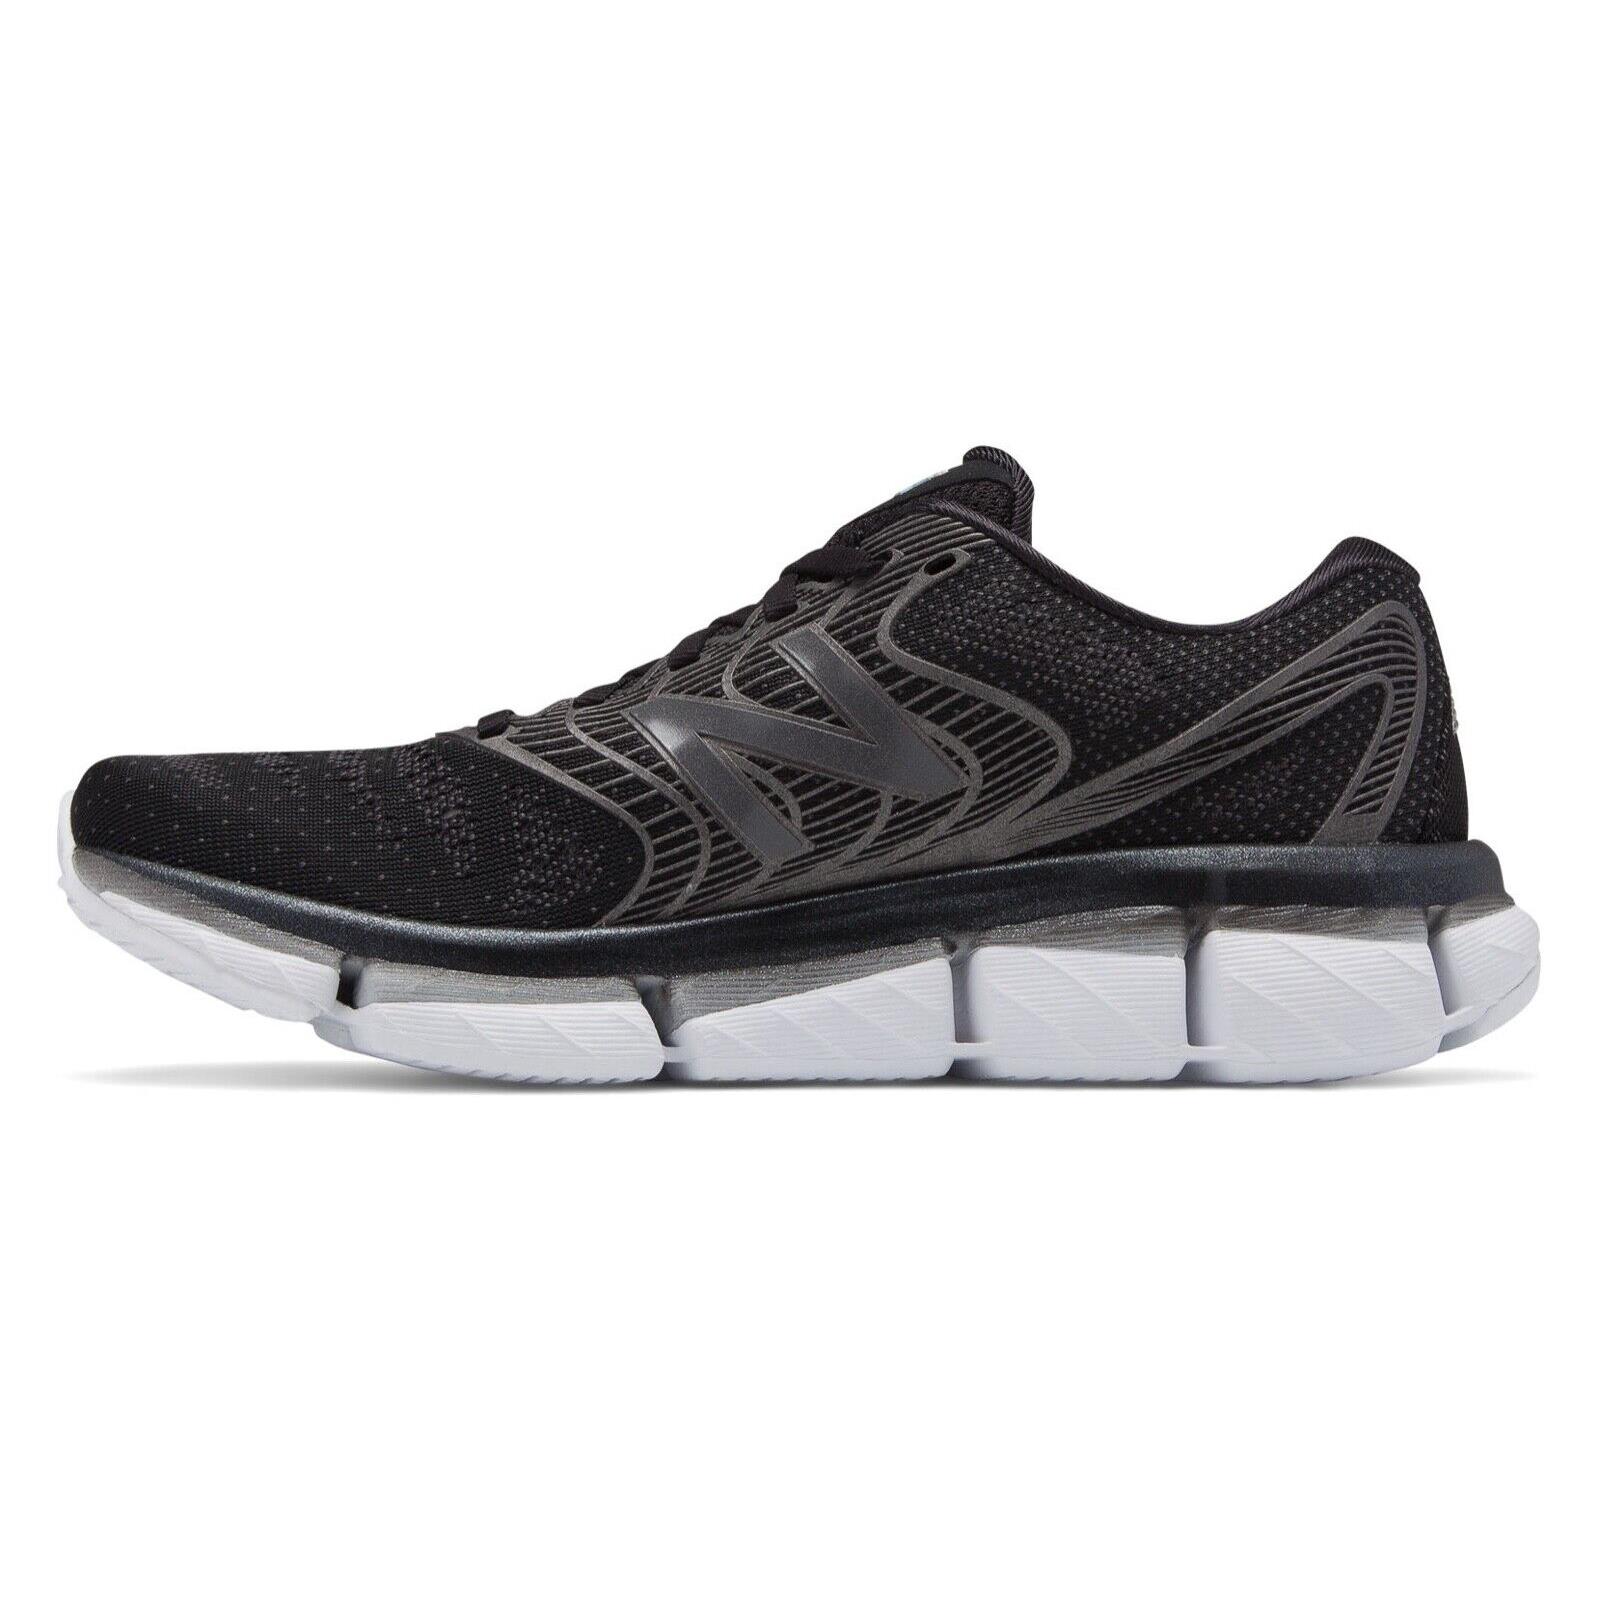 New Balance shoes  - Black with White , Black with White Manufacturer 0